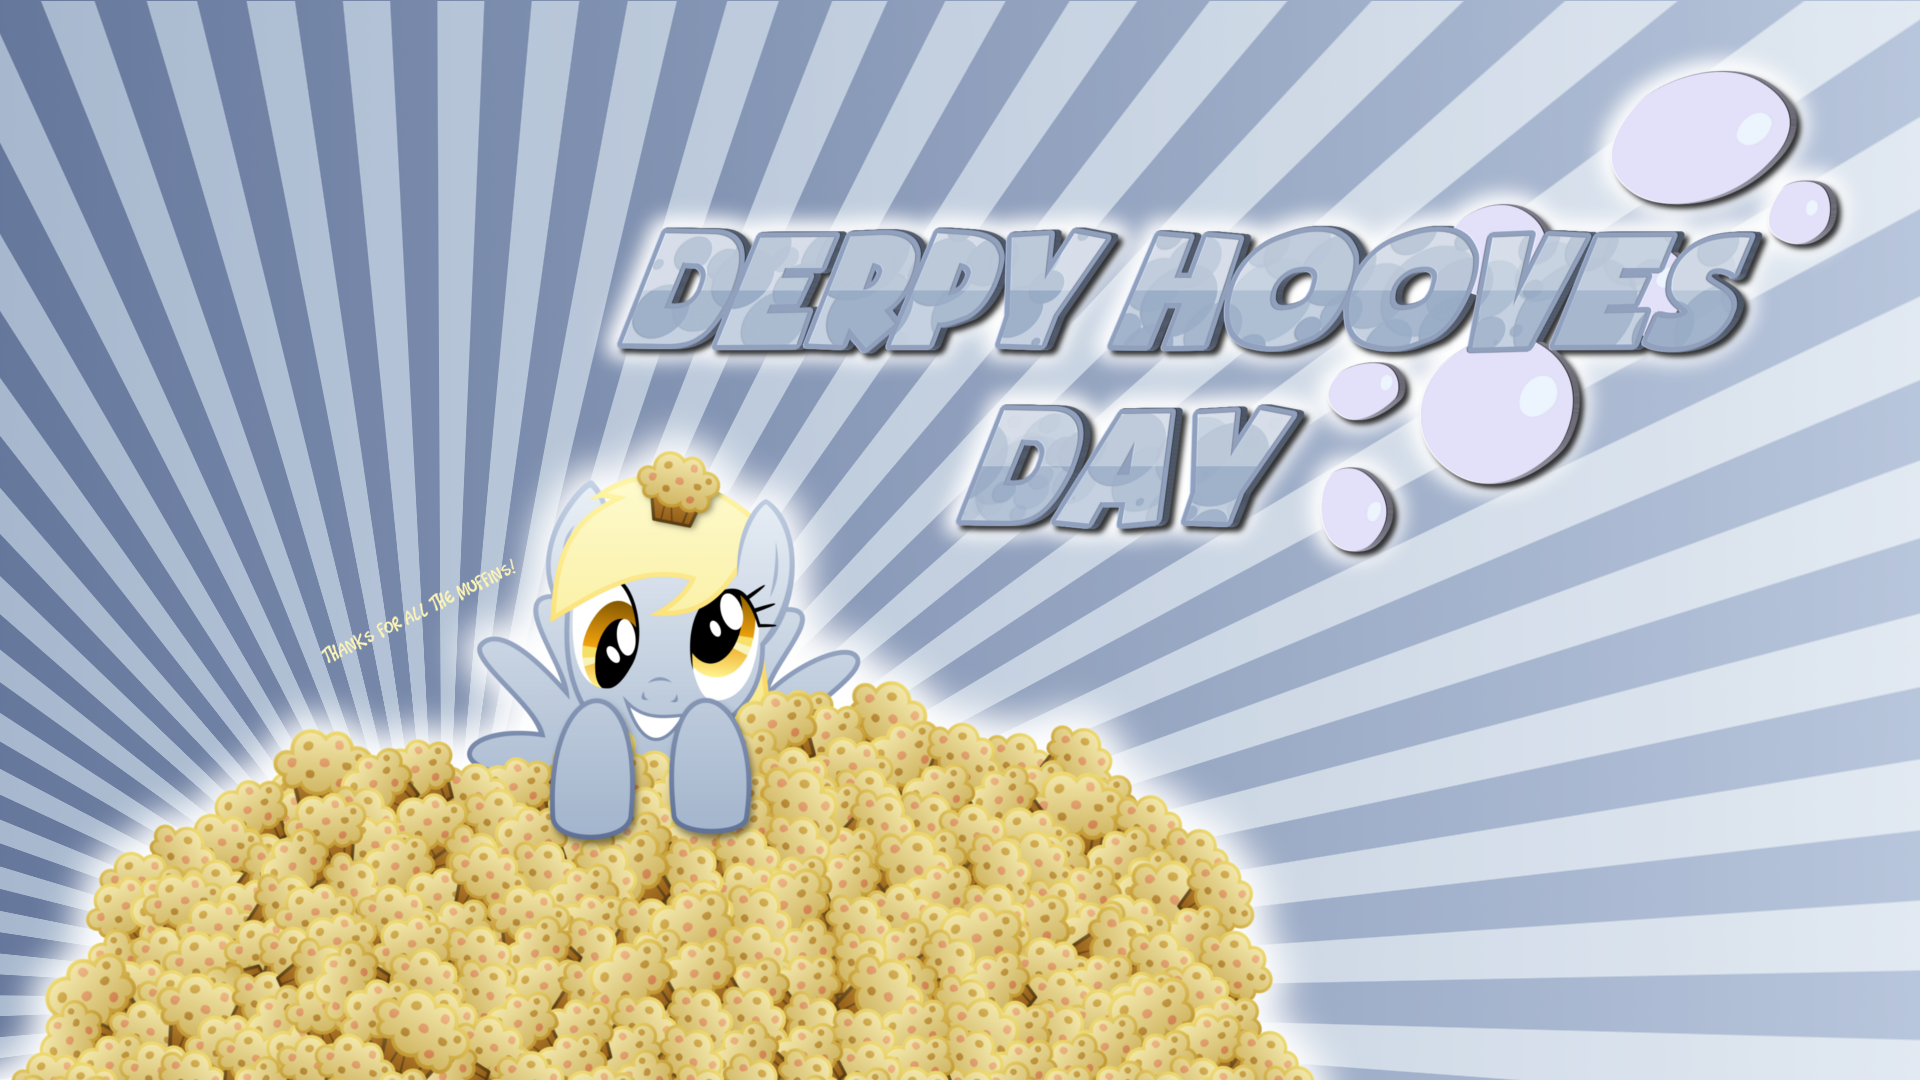 Derpy Hooves Day 2012 Wallpaper by extreme-sonic, MaximillianVeers, Tadashi--kun and ZuTheSkunk